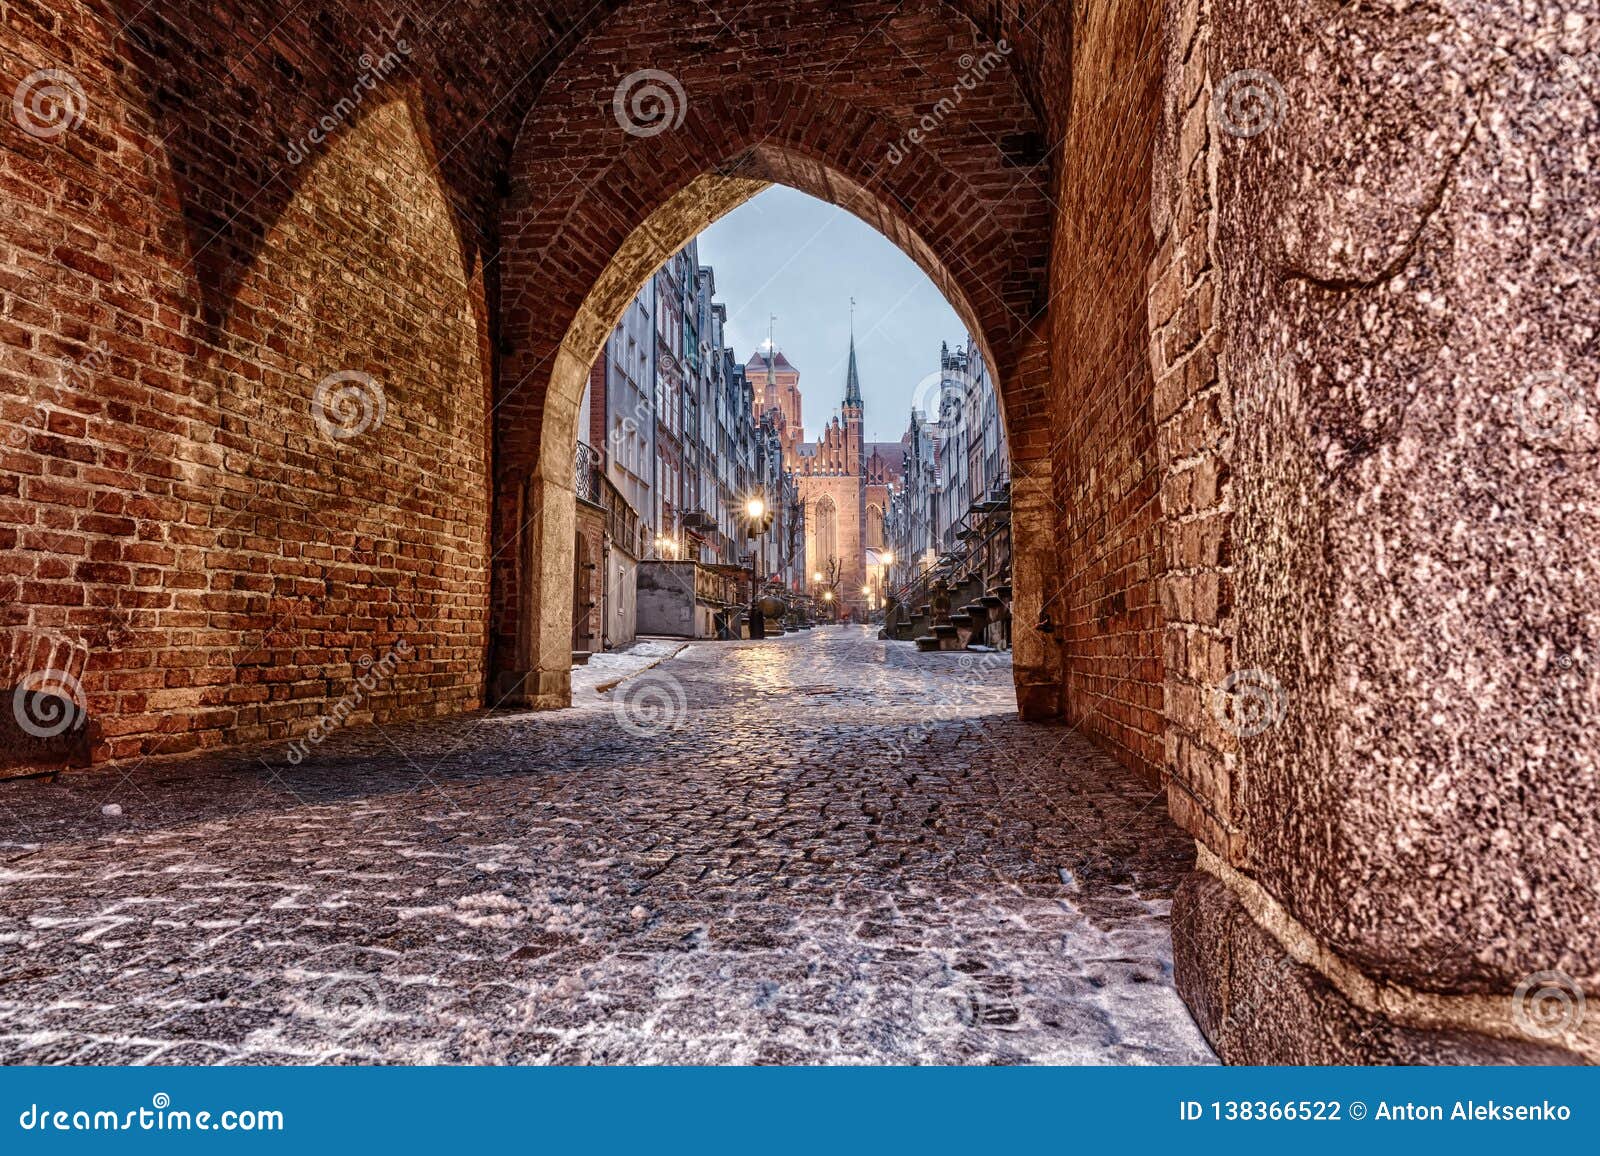 mariacka street in gdansk, view from the mariacka gate, poland